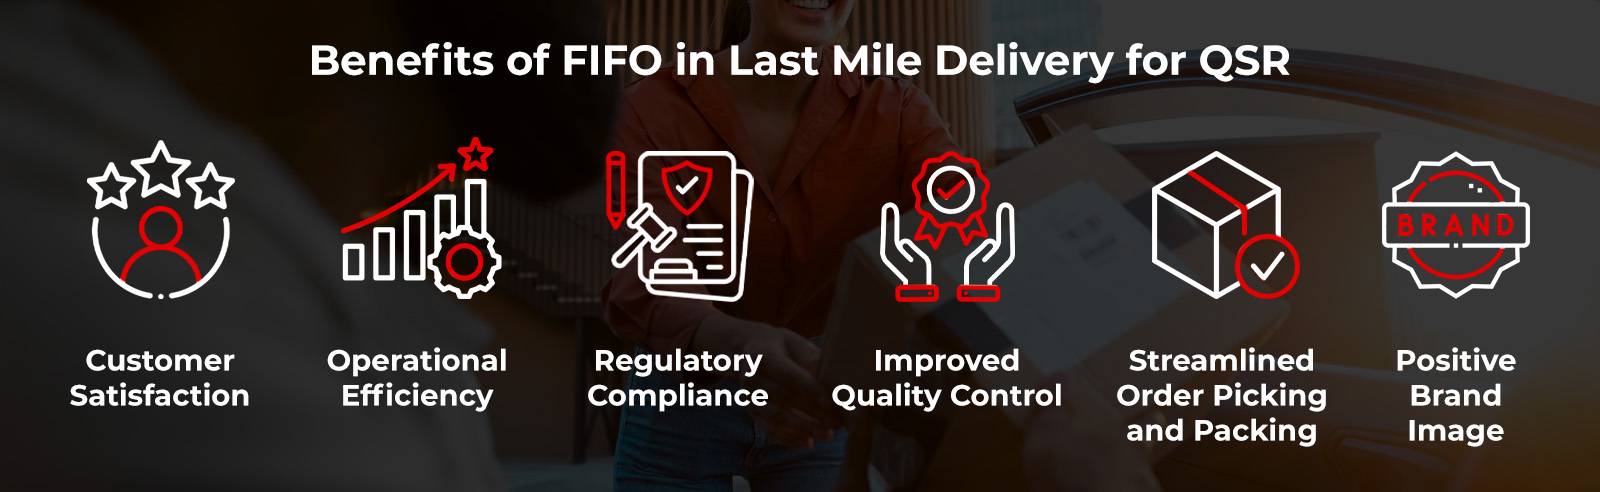 Benefits of FIFO in last mile delivery QSR